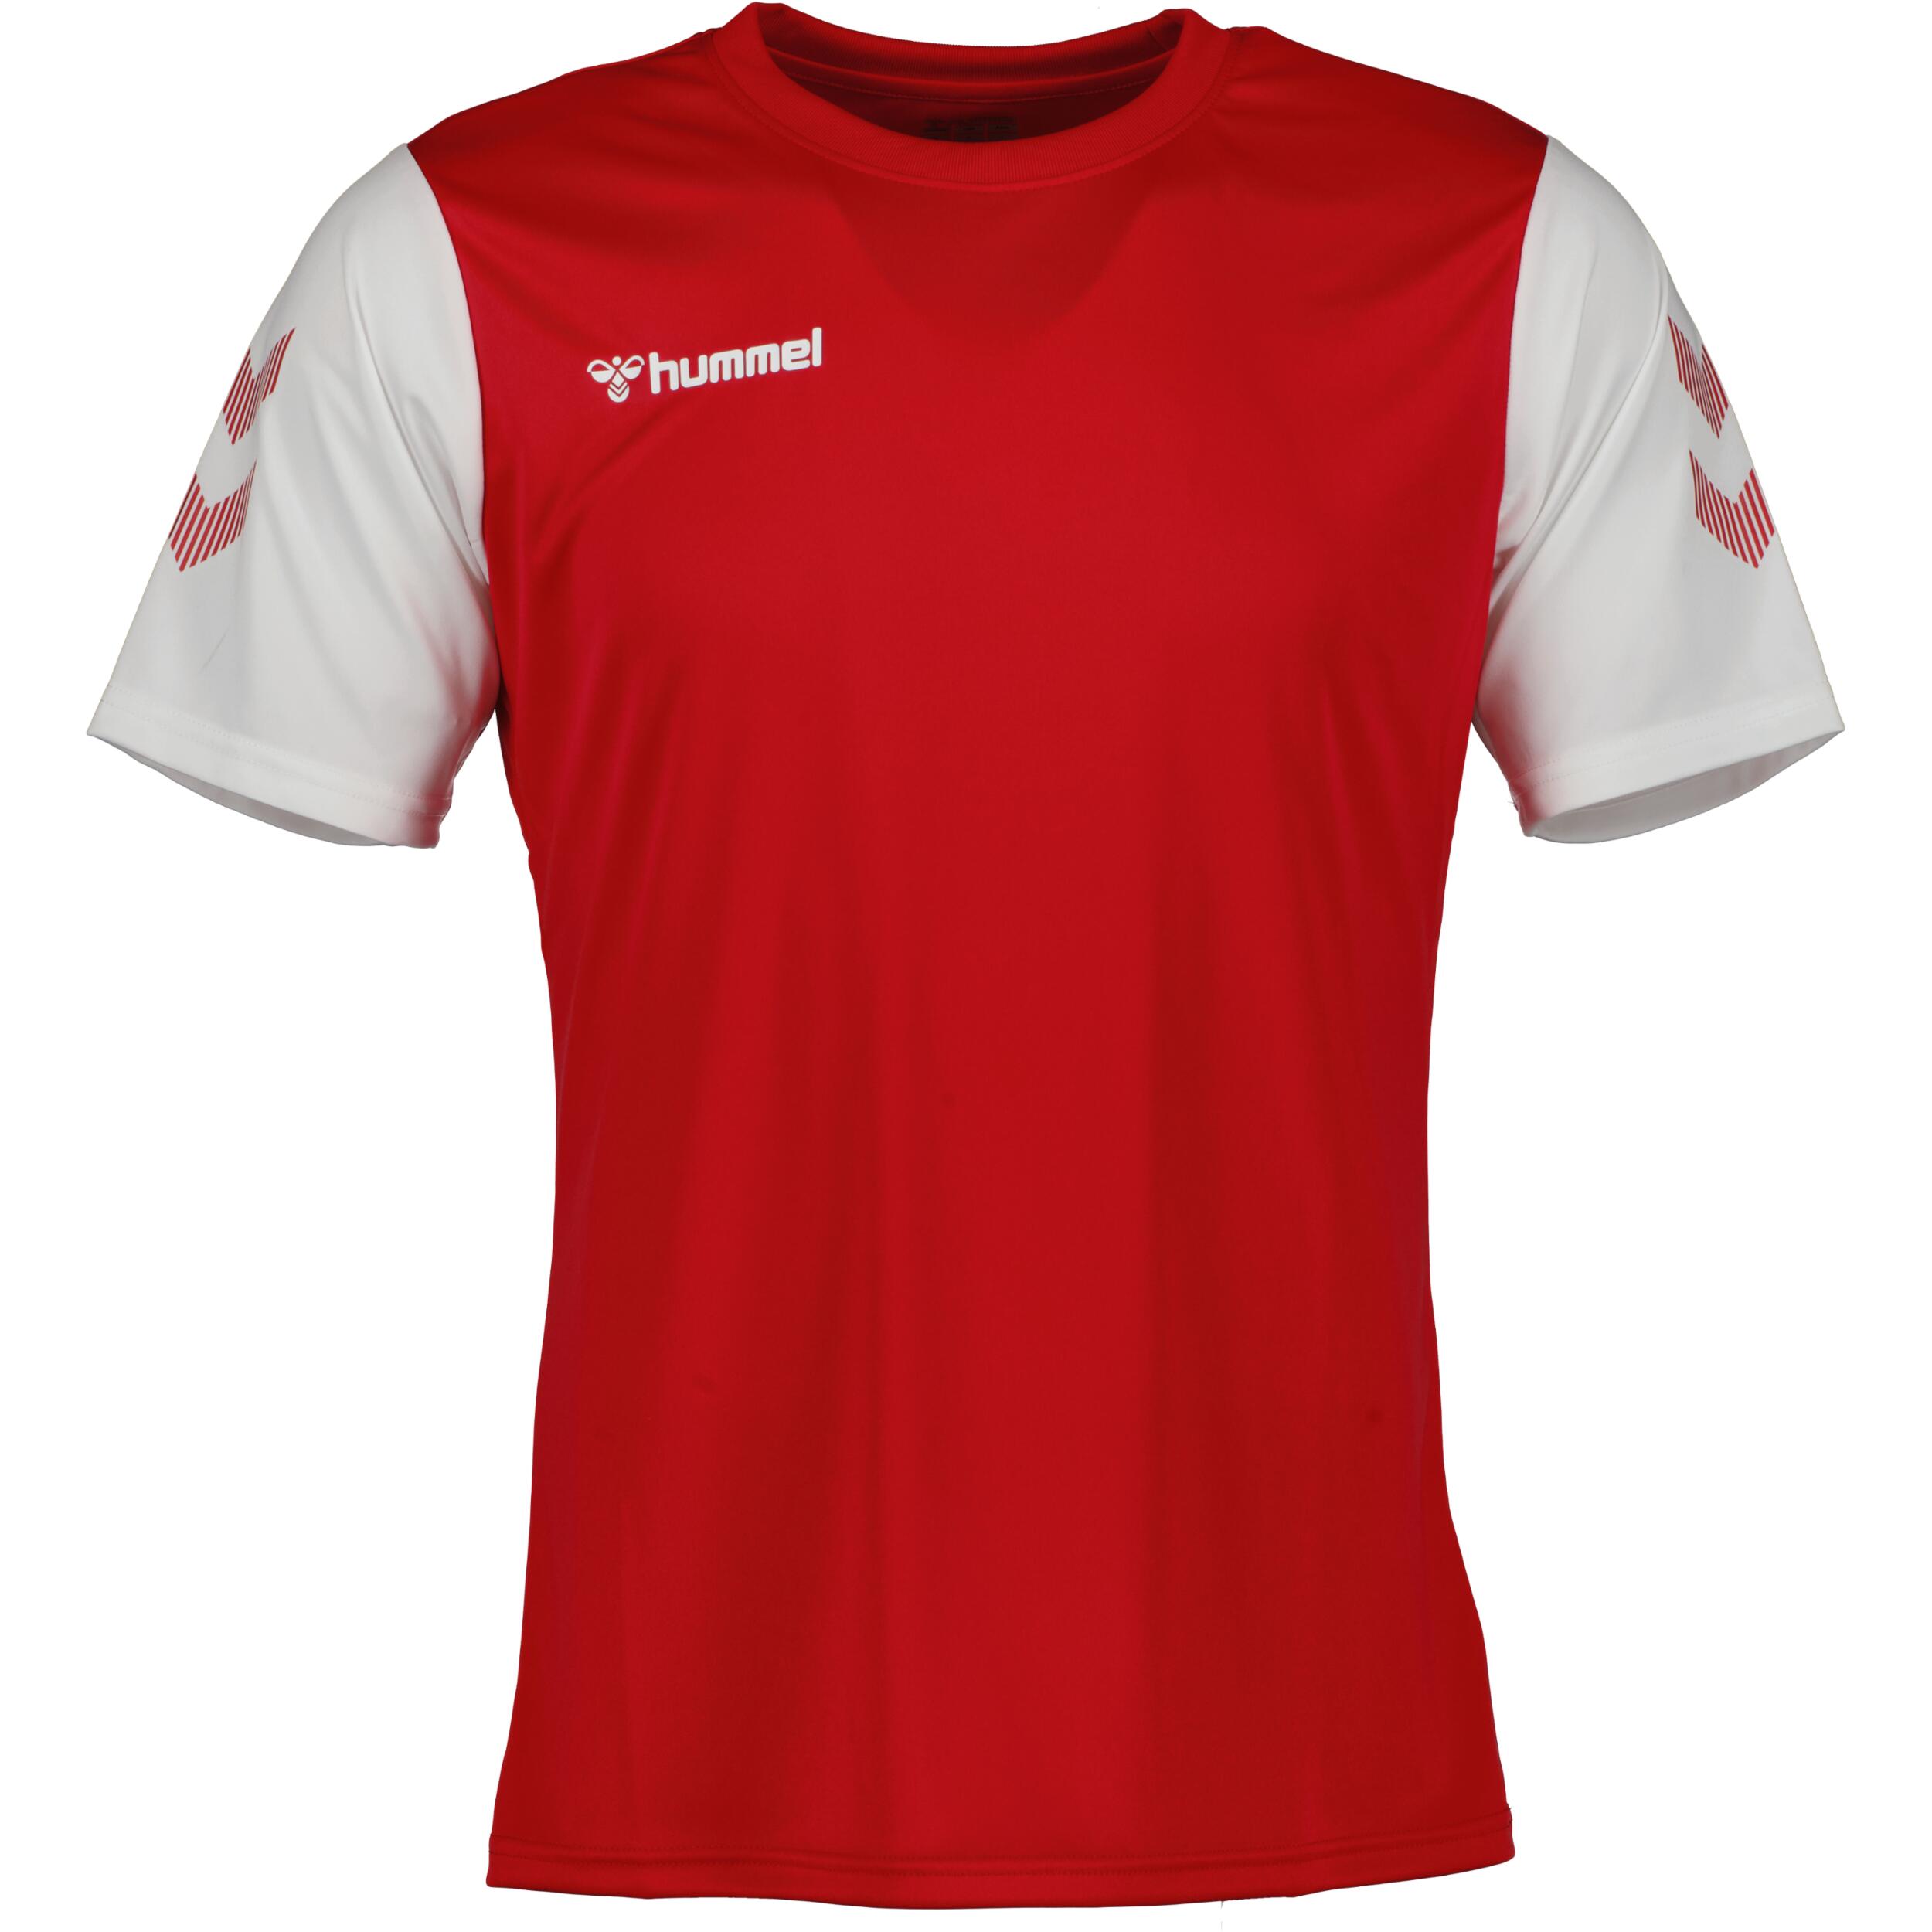 Match jersey for men, great for football, in red/white 1/3